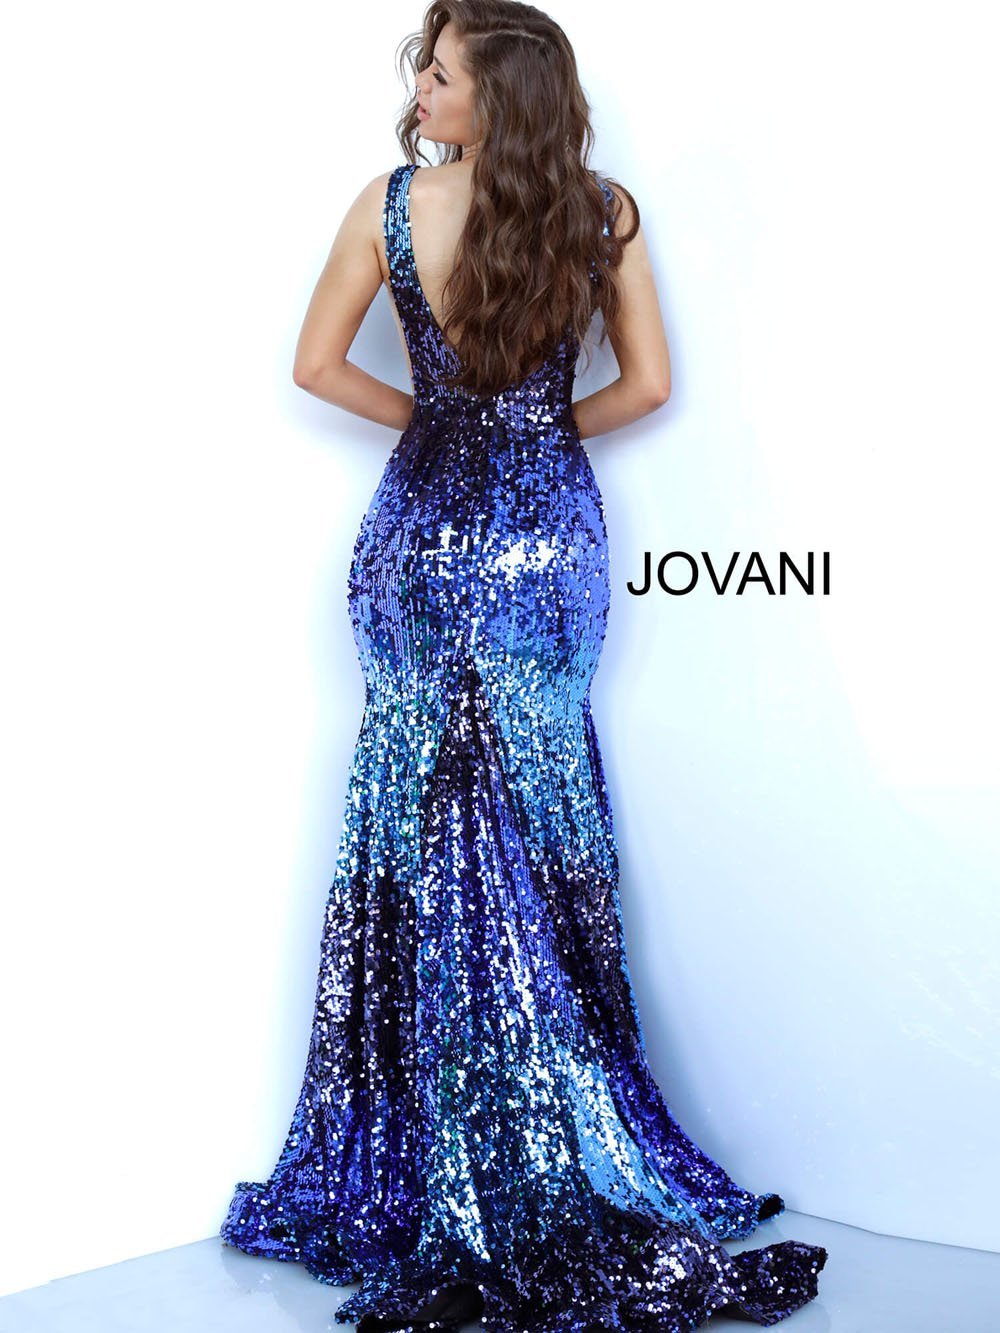 Jovani 3192 dress images in these colors: Blue Multi.